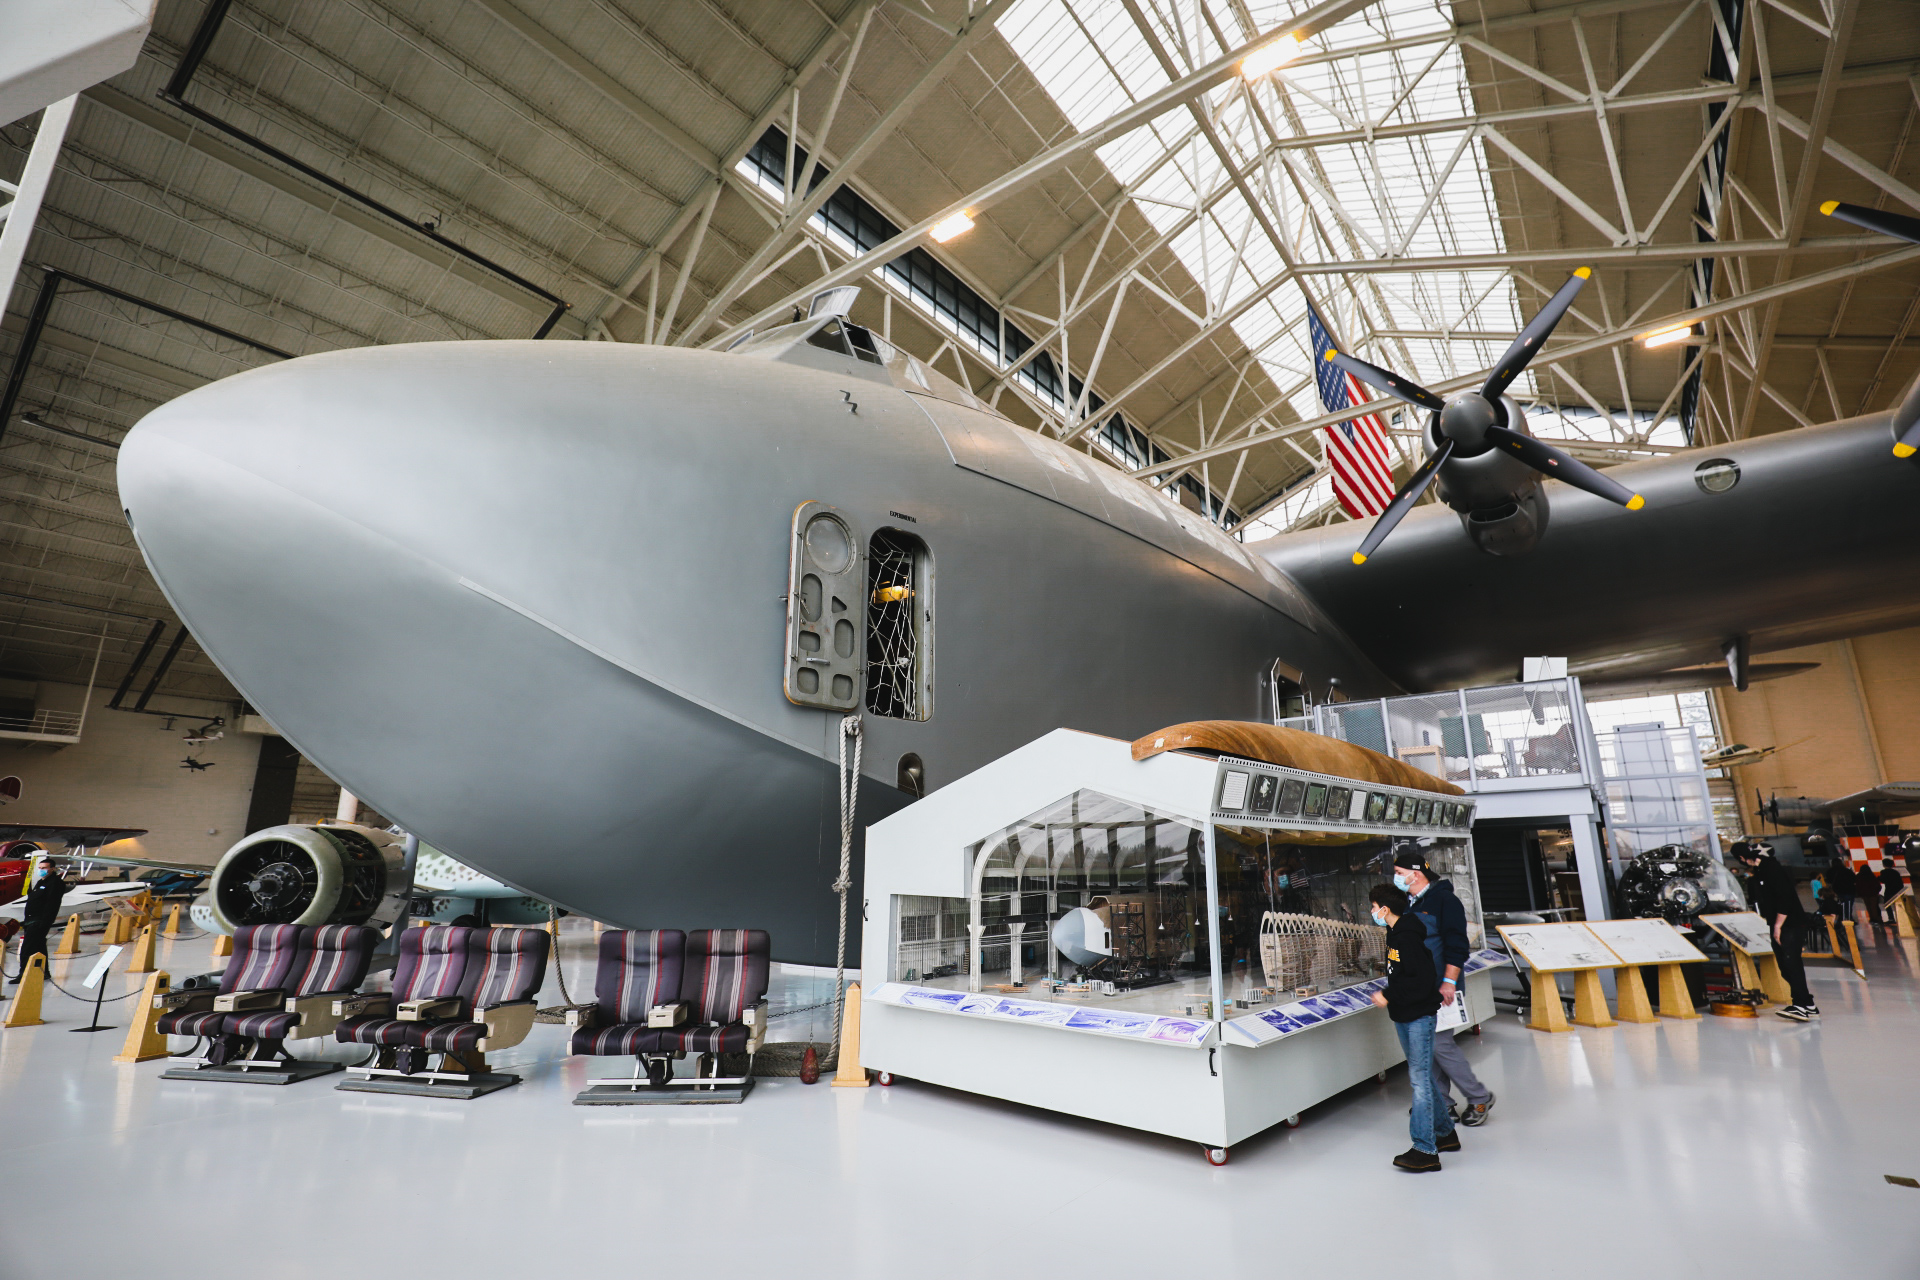 The Spruce Goose: one of the largest aircraft ever built in aviation ...